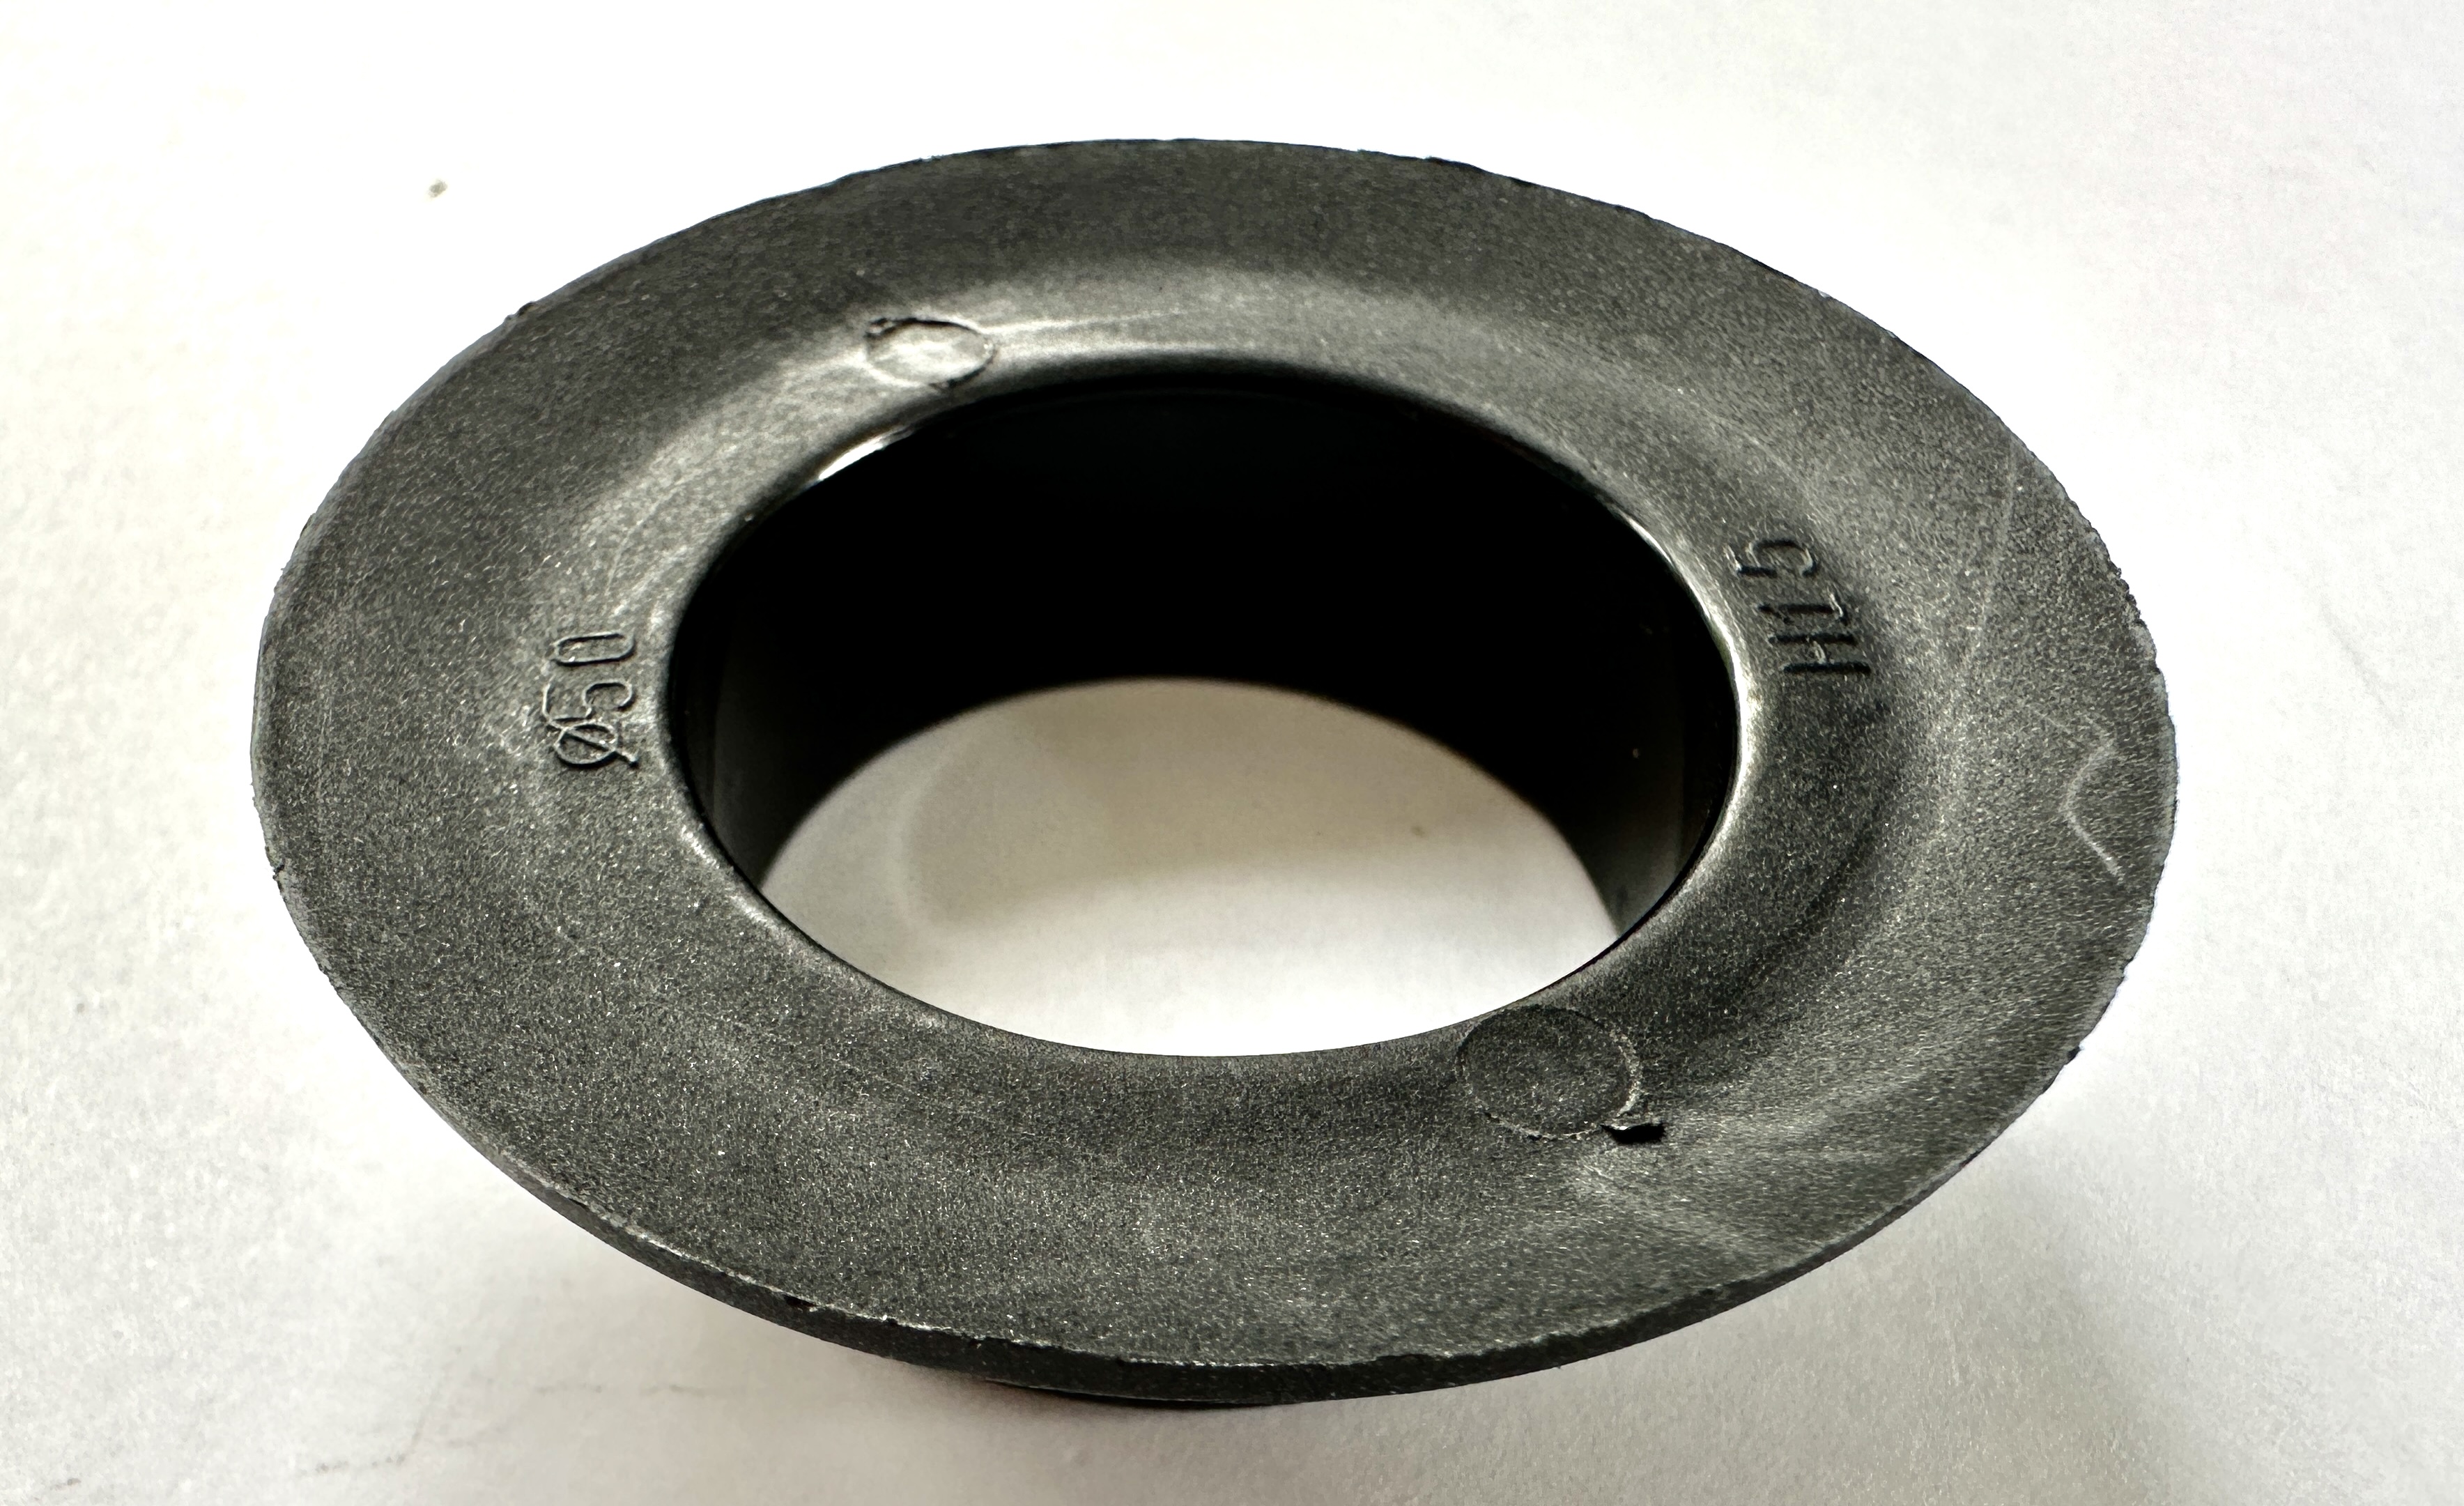 Conical spacer from Ritchey for semi-integrated headsets.